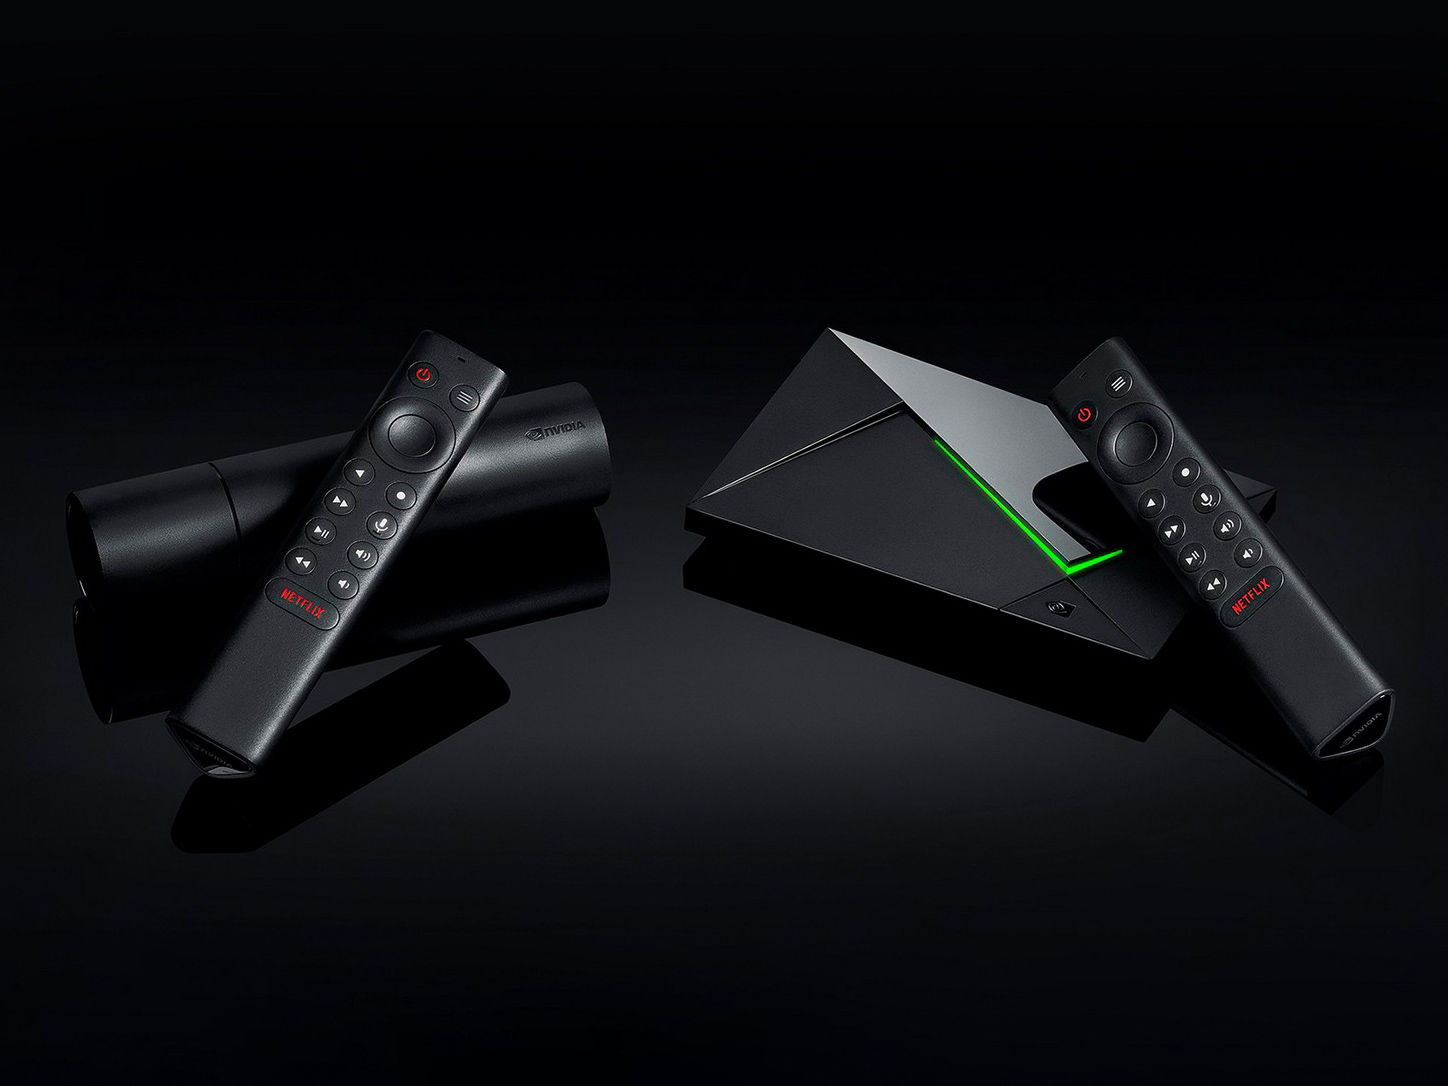 Meet the new best Android TV device: The 2019 Nvidia Shield TV